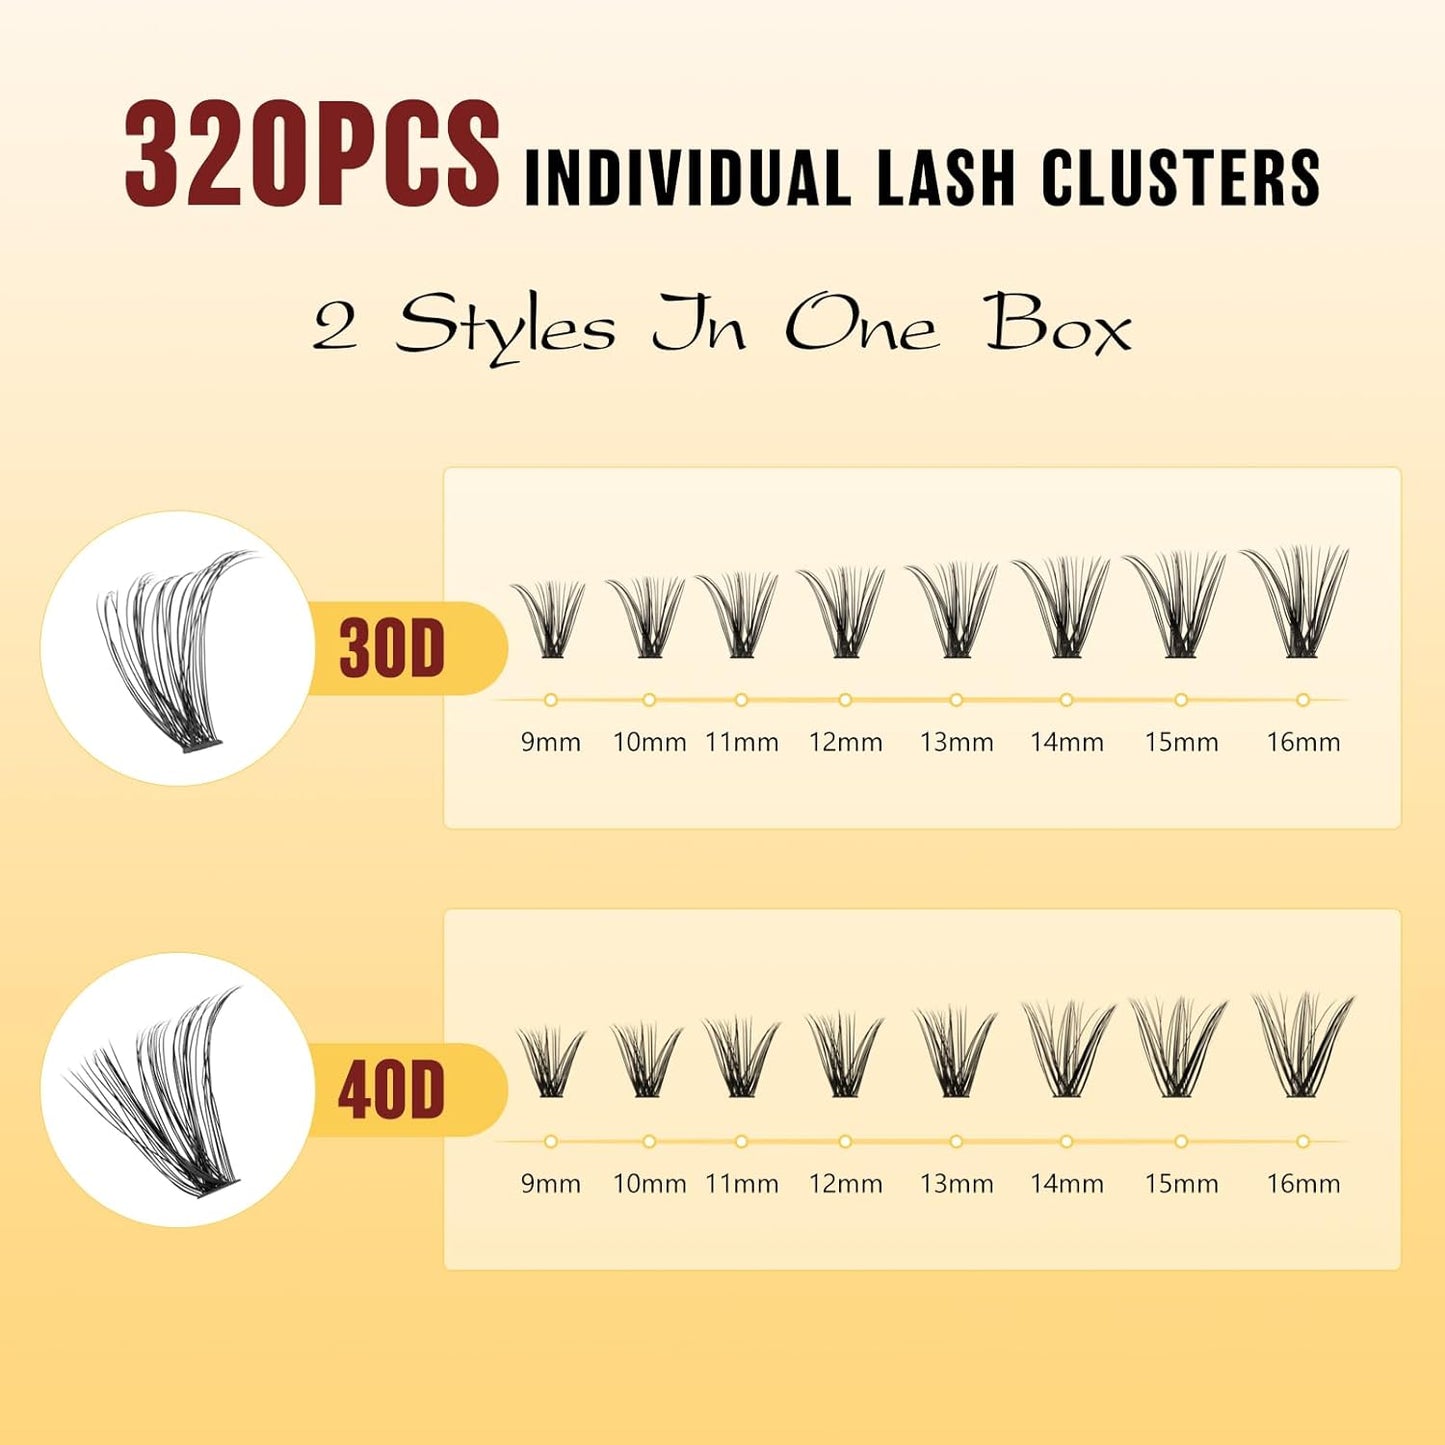 320 pcs DIY Lash Extension Kit w/ Cluster Lashes Glue Remover for Natural Look DIY At Home(ZS-30D+40D-k